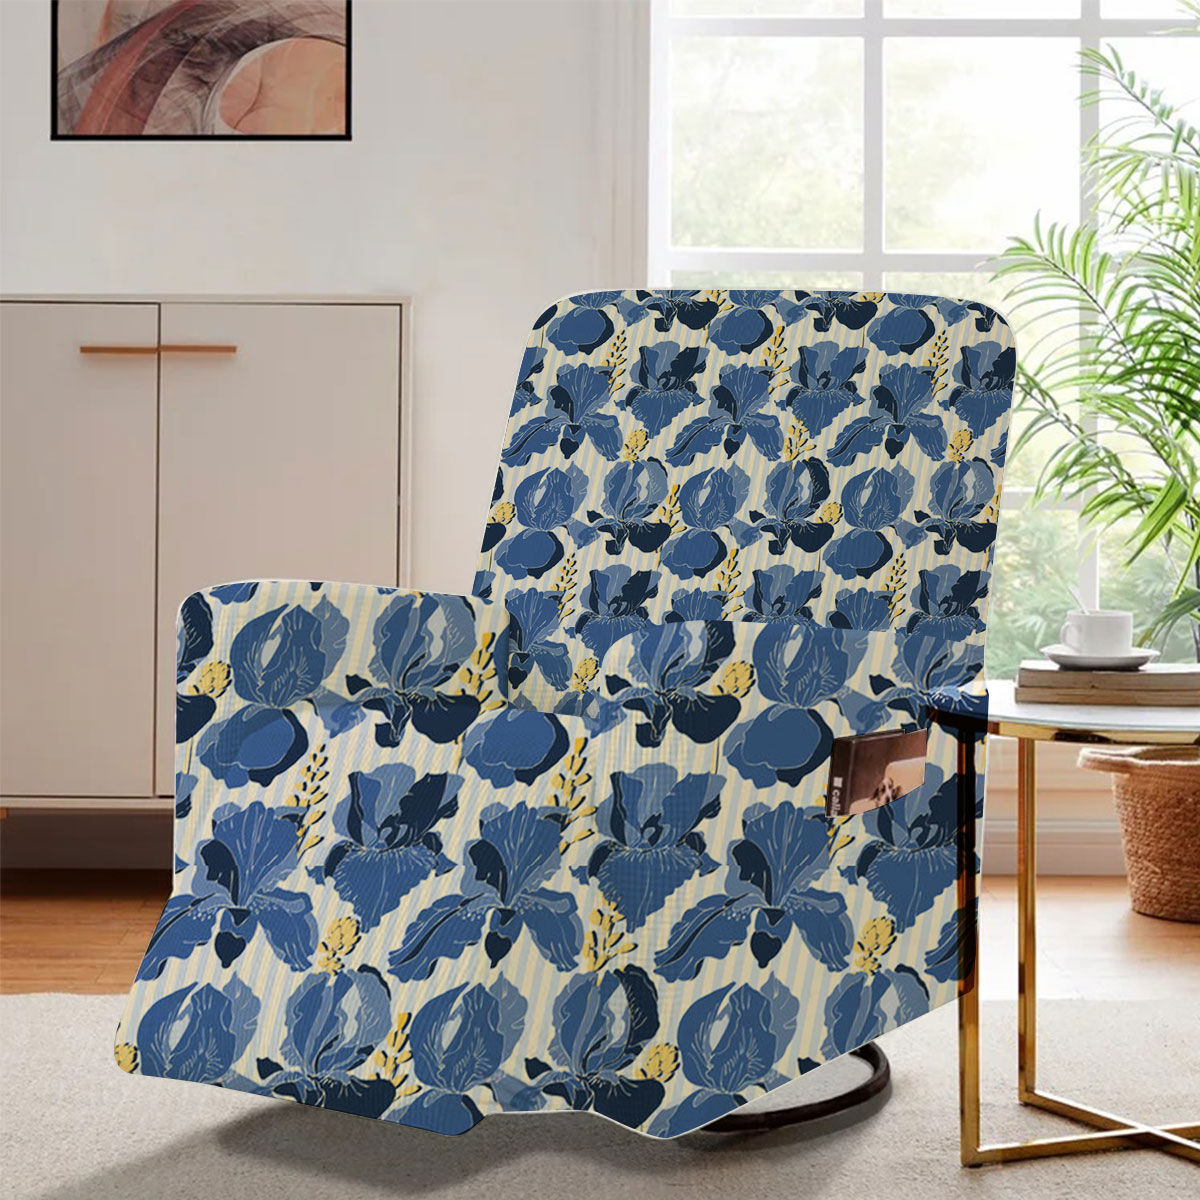 Blue Iris Flowers Isolated On A Light White And Yellow Striped Recliner Slipcover